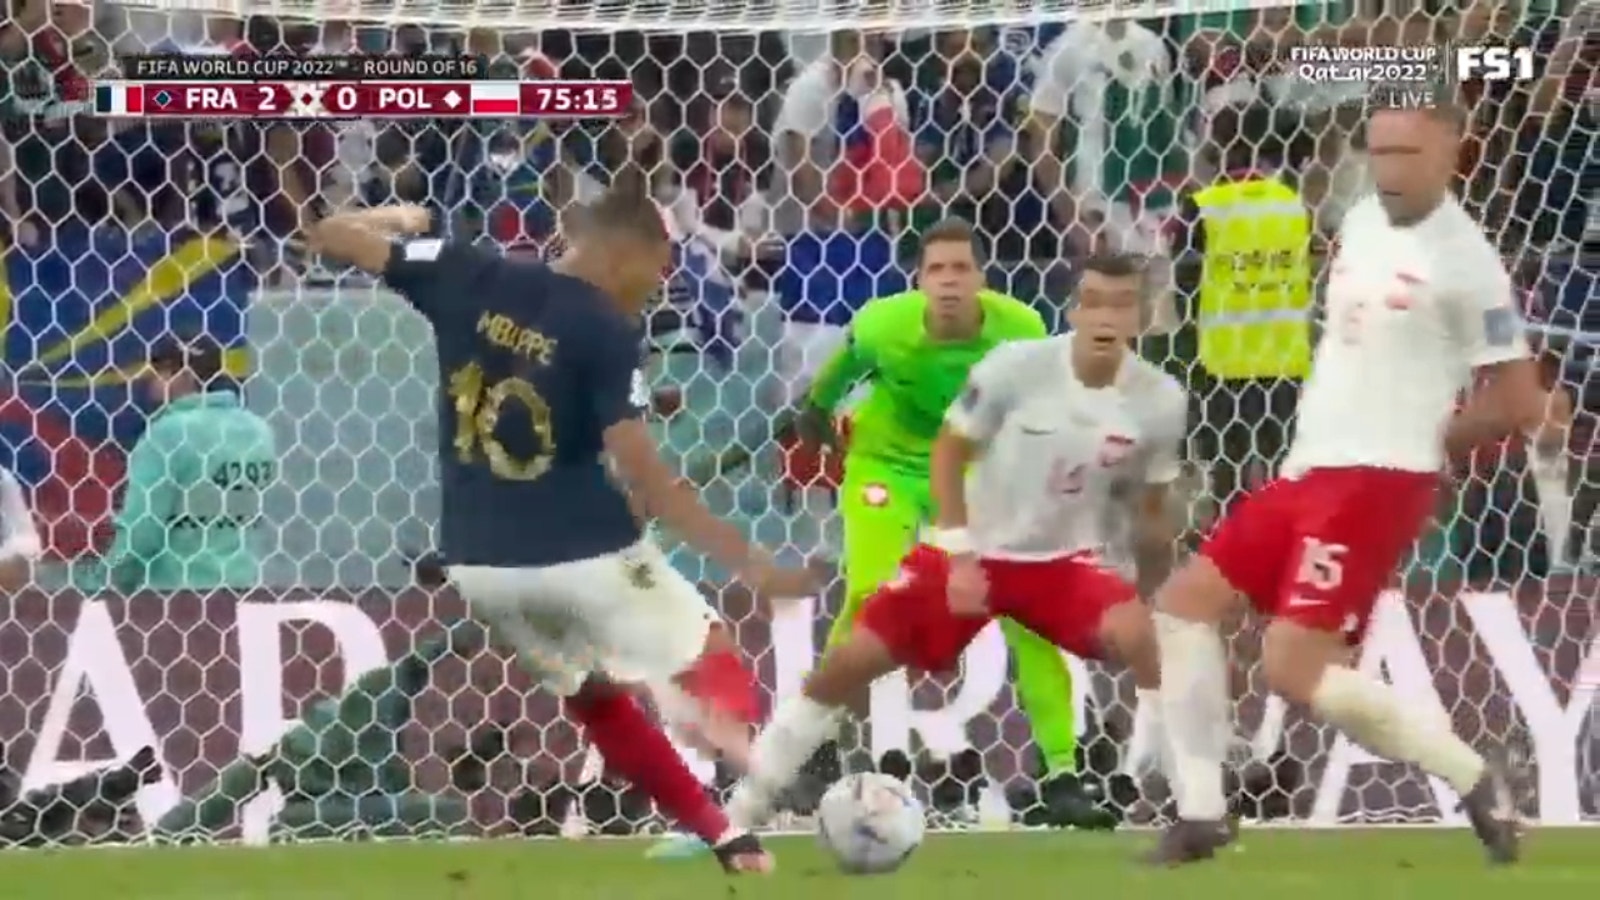 Kylian Mbappé scores to give France a 2-0 lead